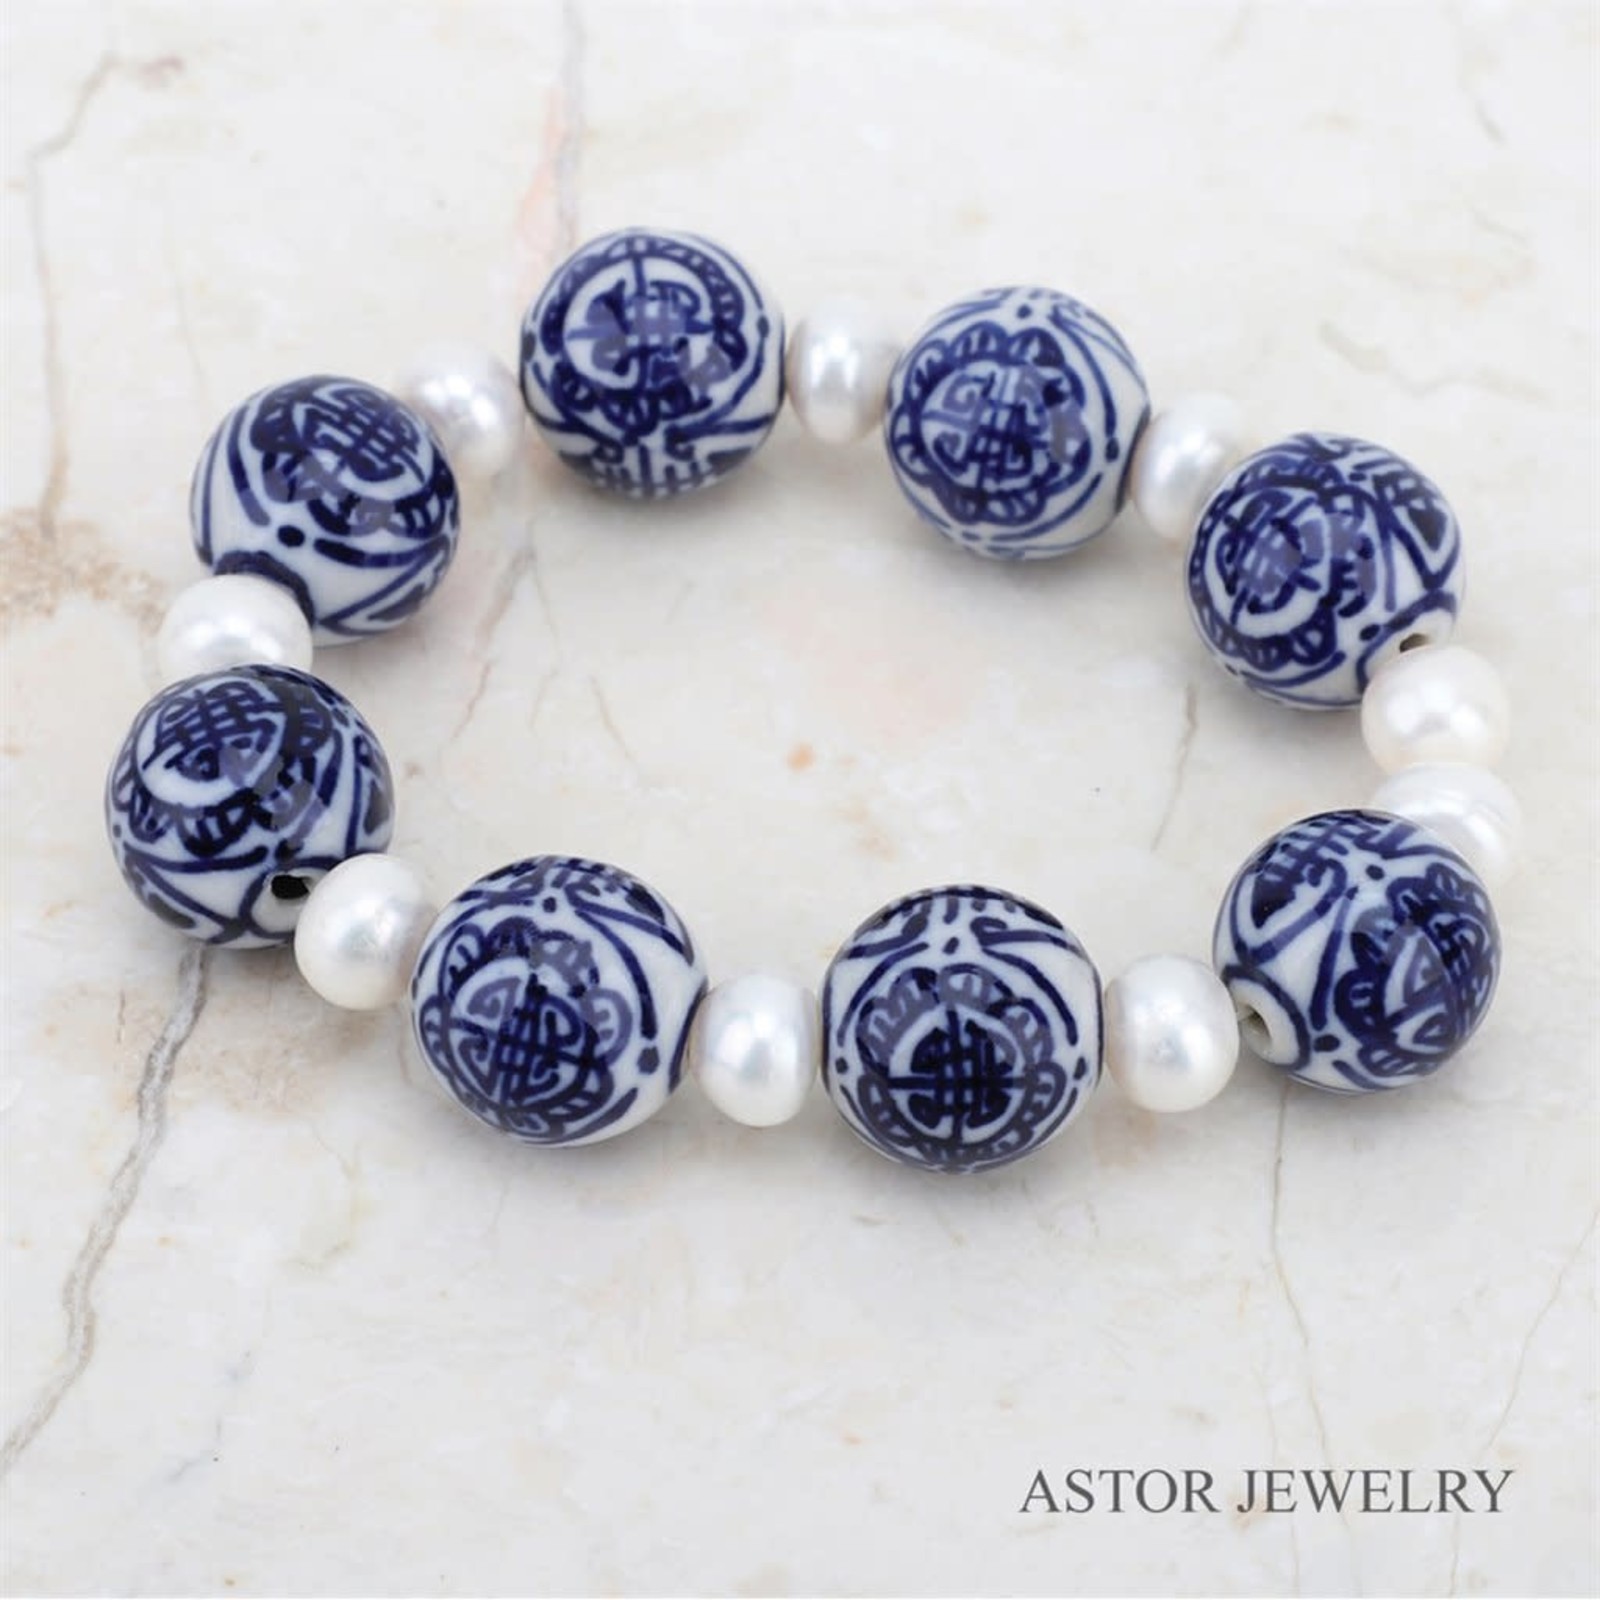 Astor Jewelry 14Mm Large Blue/White  Beads With Fresh Water Pearl Bracelet - Made in U.S.A loading=